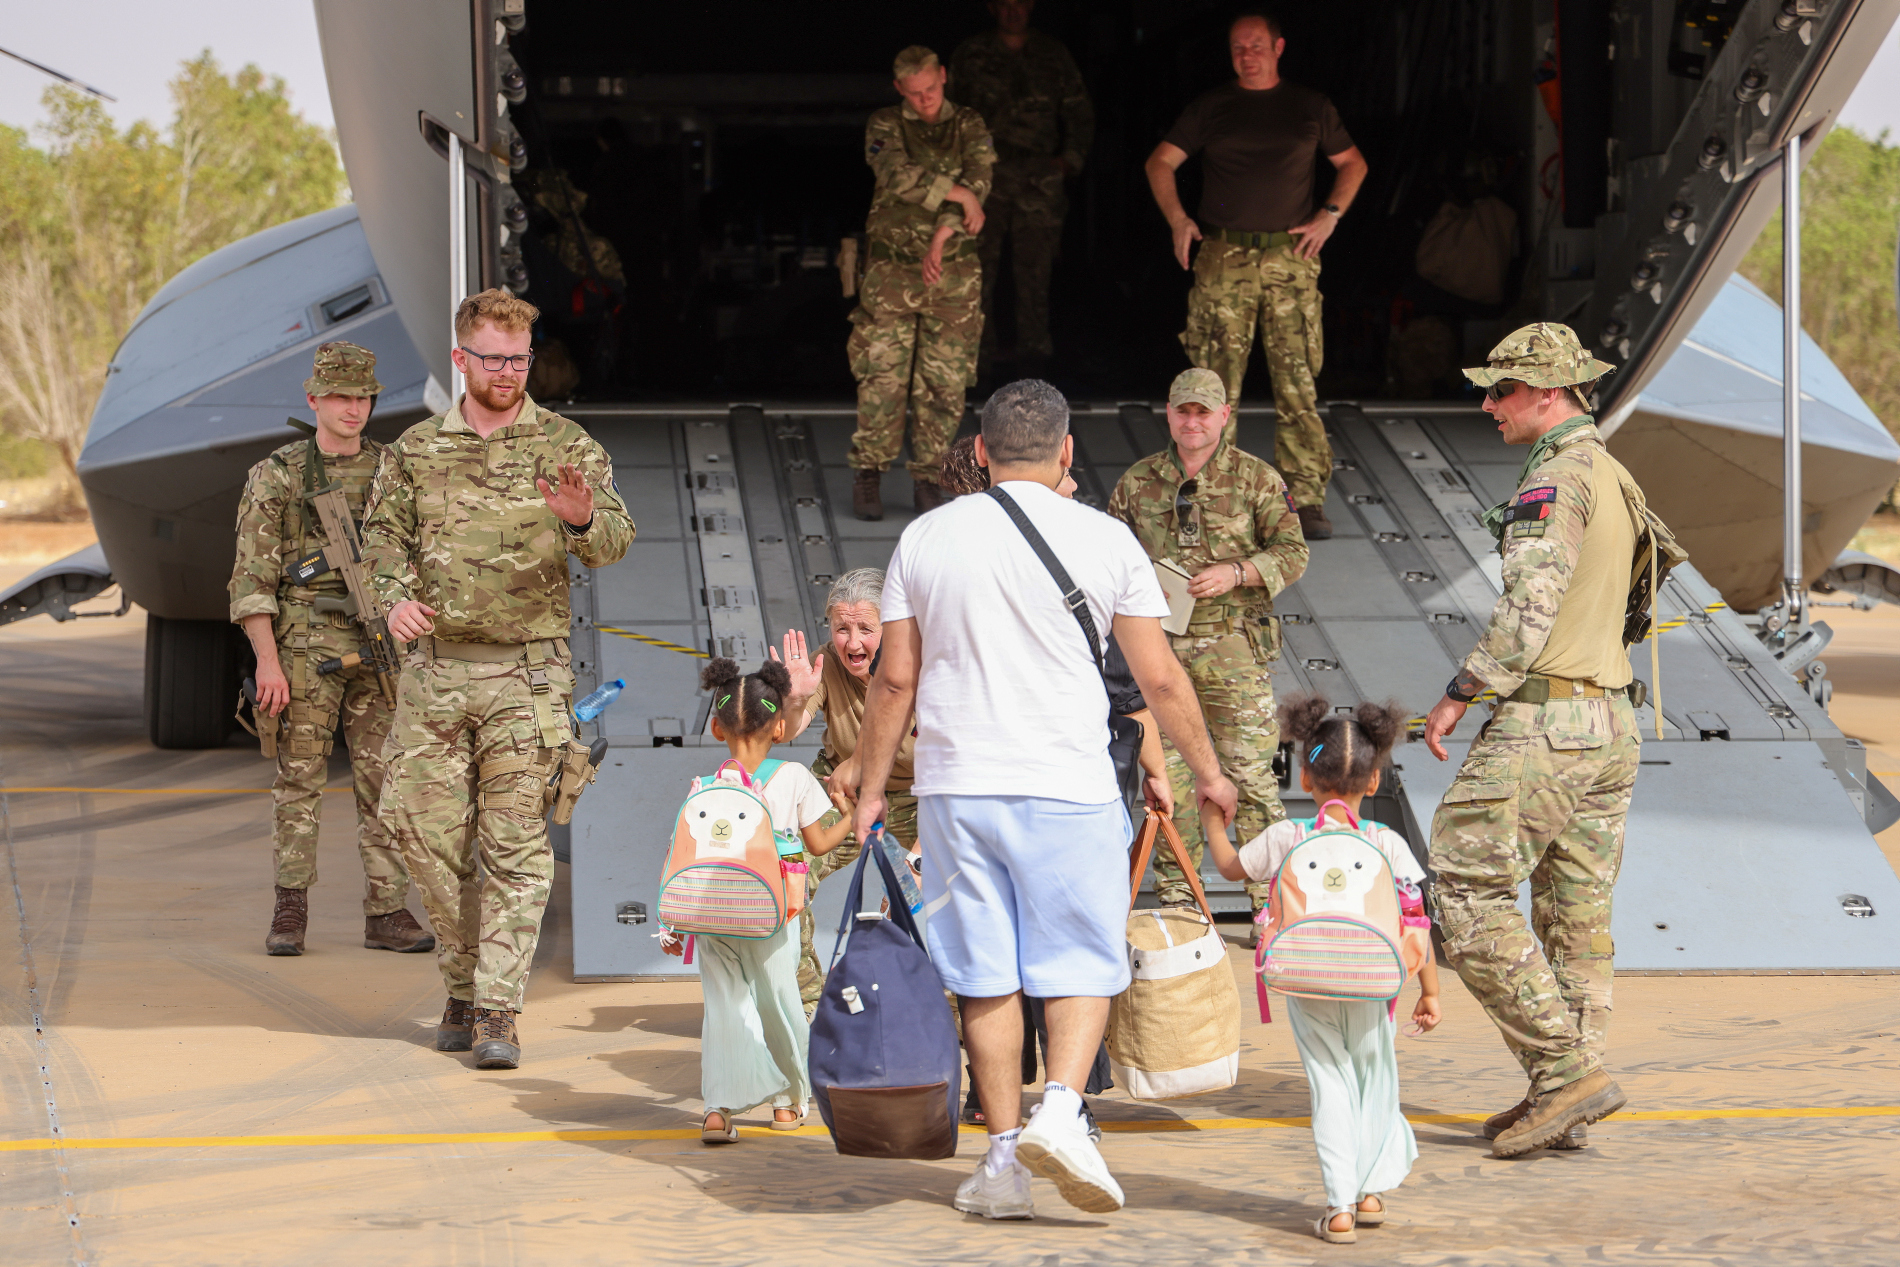 Aircraft based at RAF Brize Norton have played a key role in carrying out the evacuation operation of British citizens from Sudan.